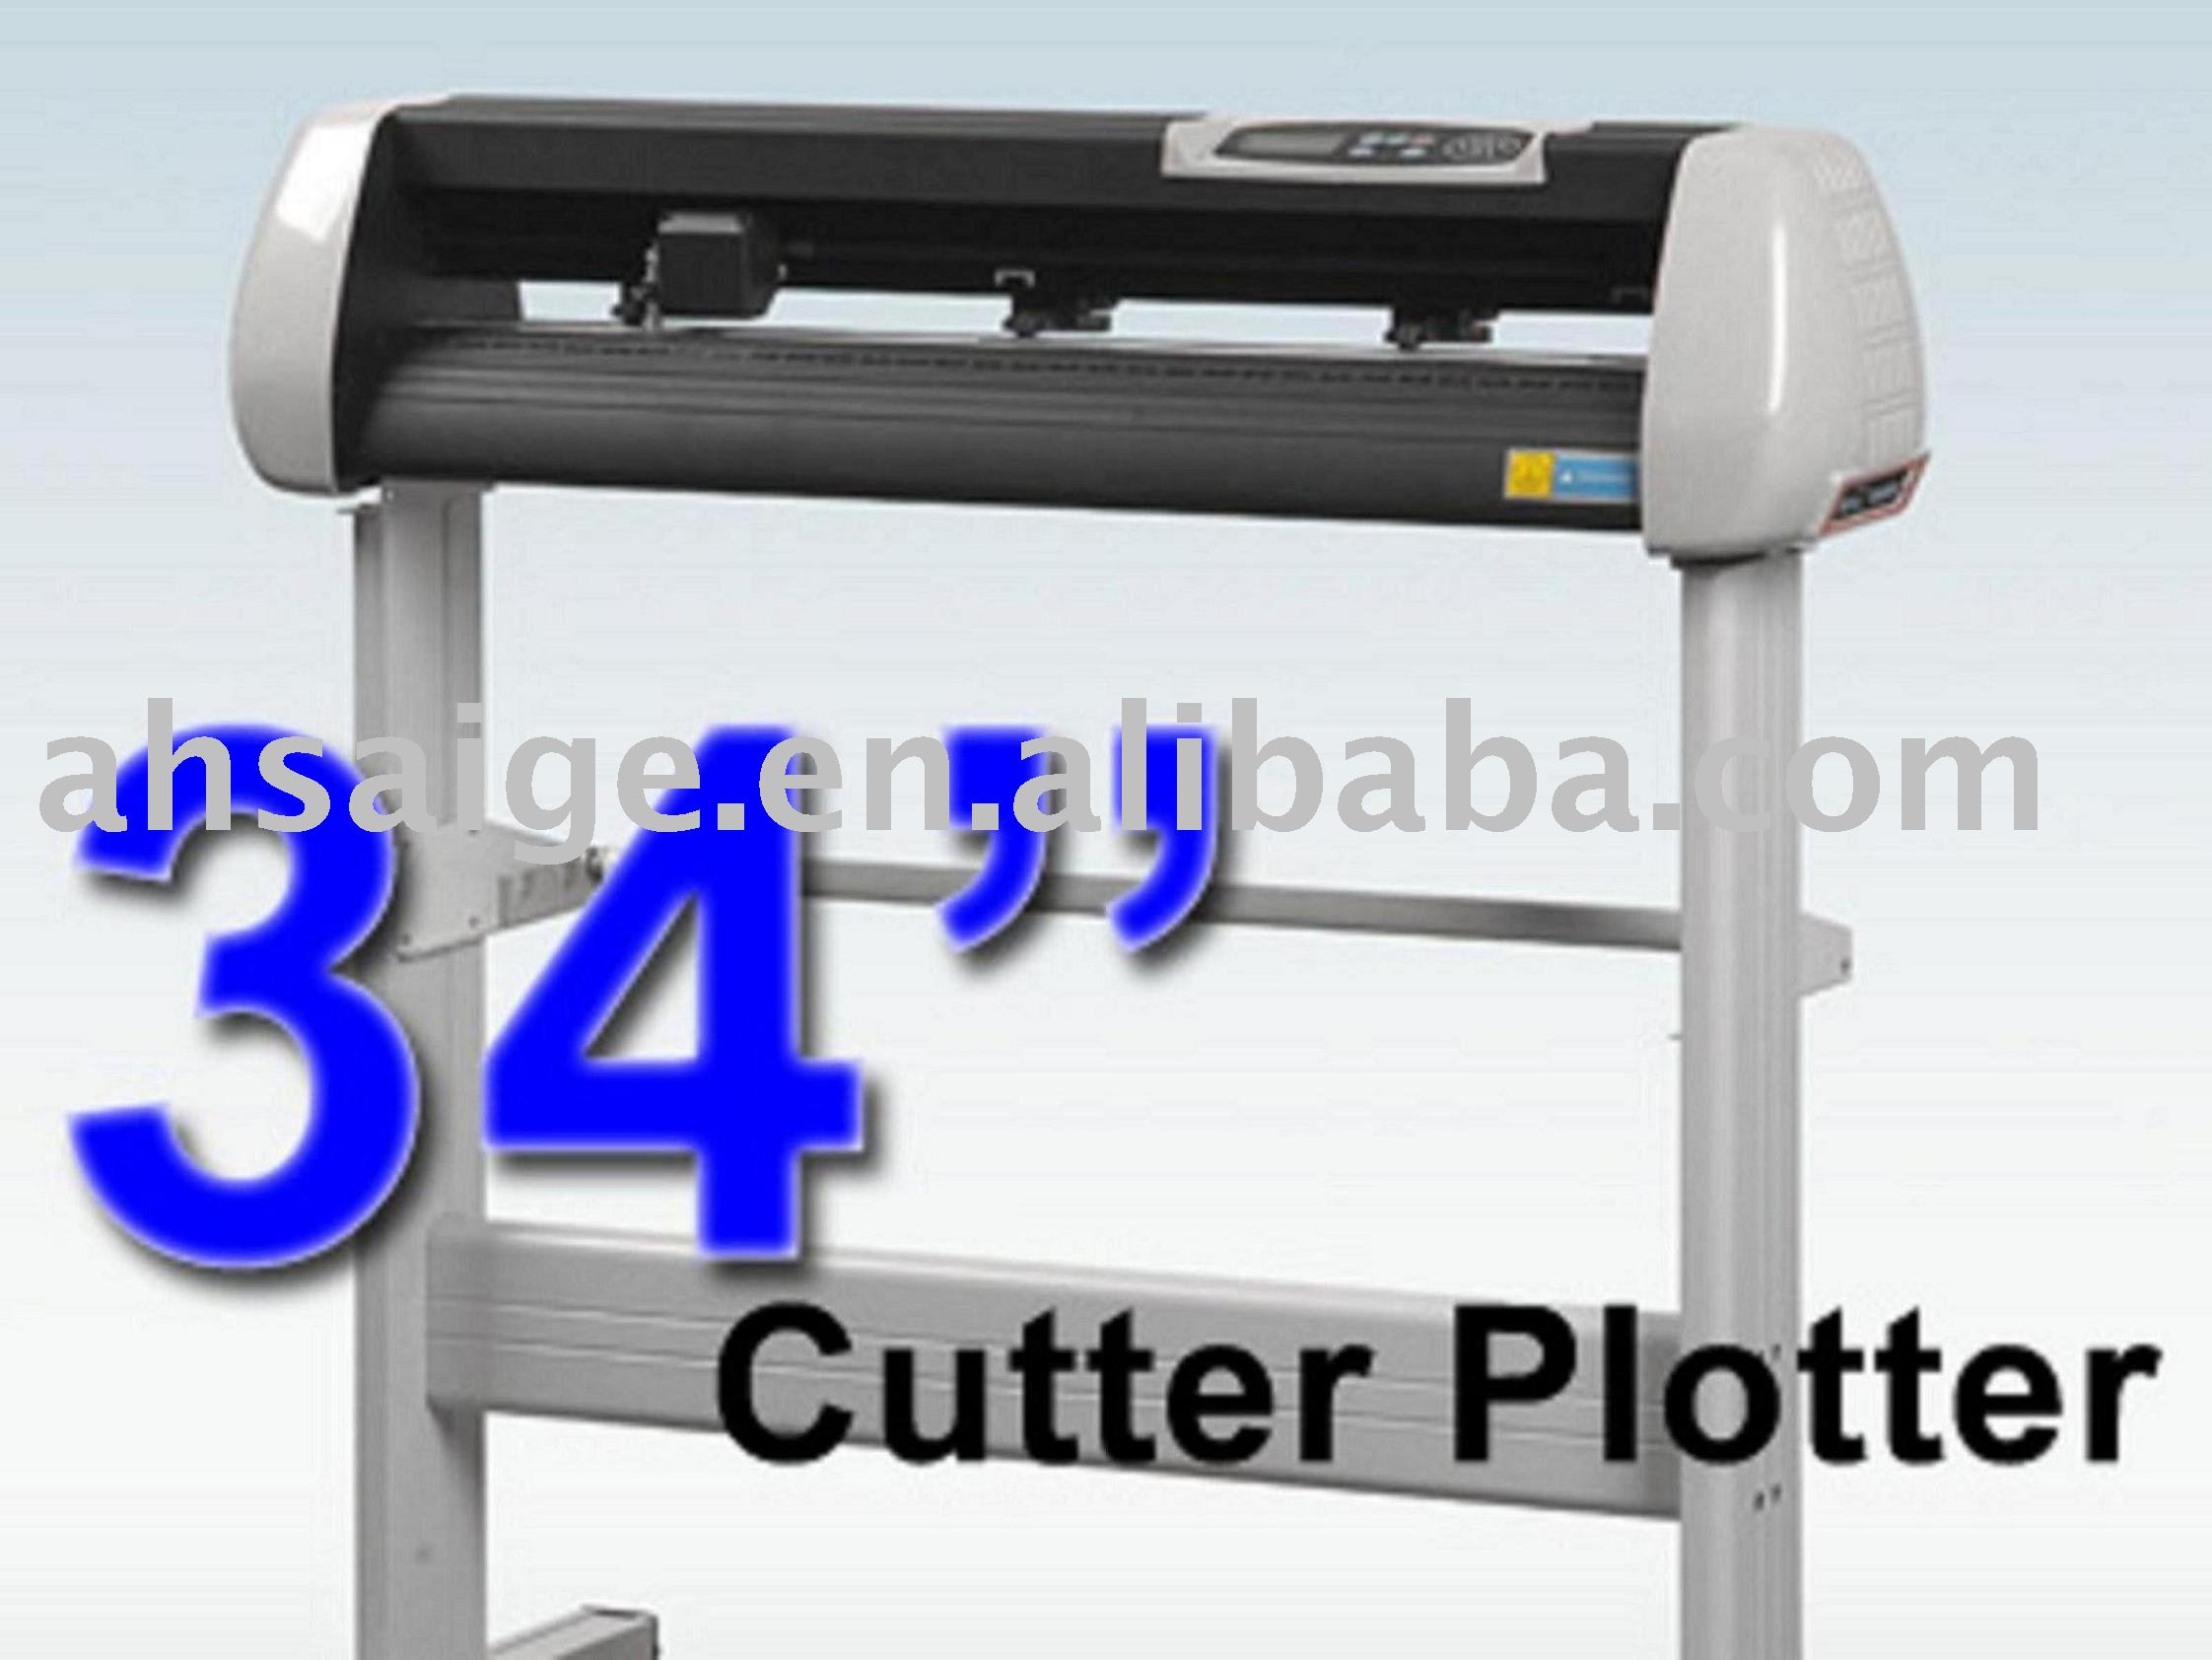 Cutter Plotter 34 Free Shipping to South America